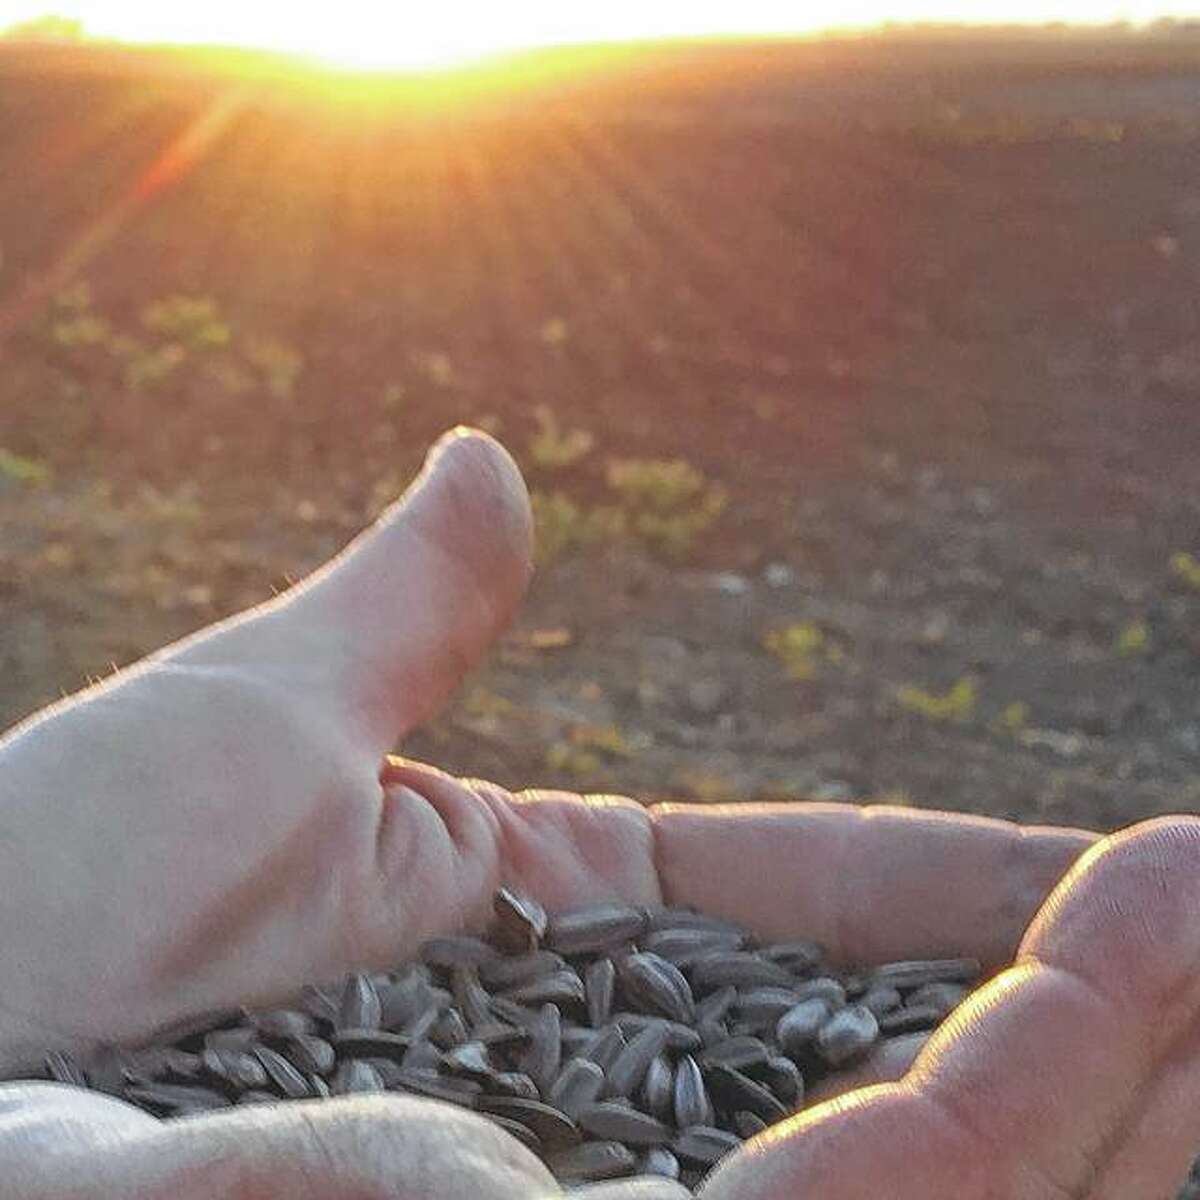 Sunflower seeds rest in a farmer’s hand, waiting to be planted.